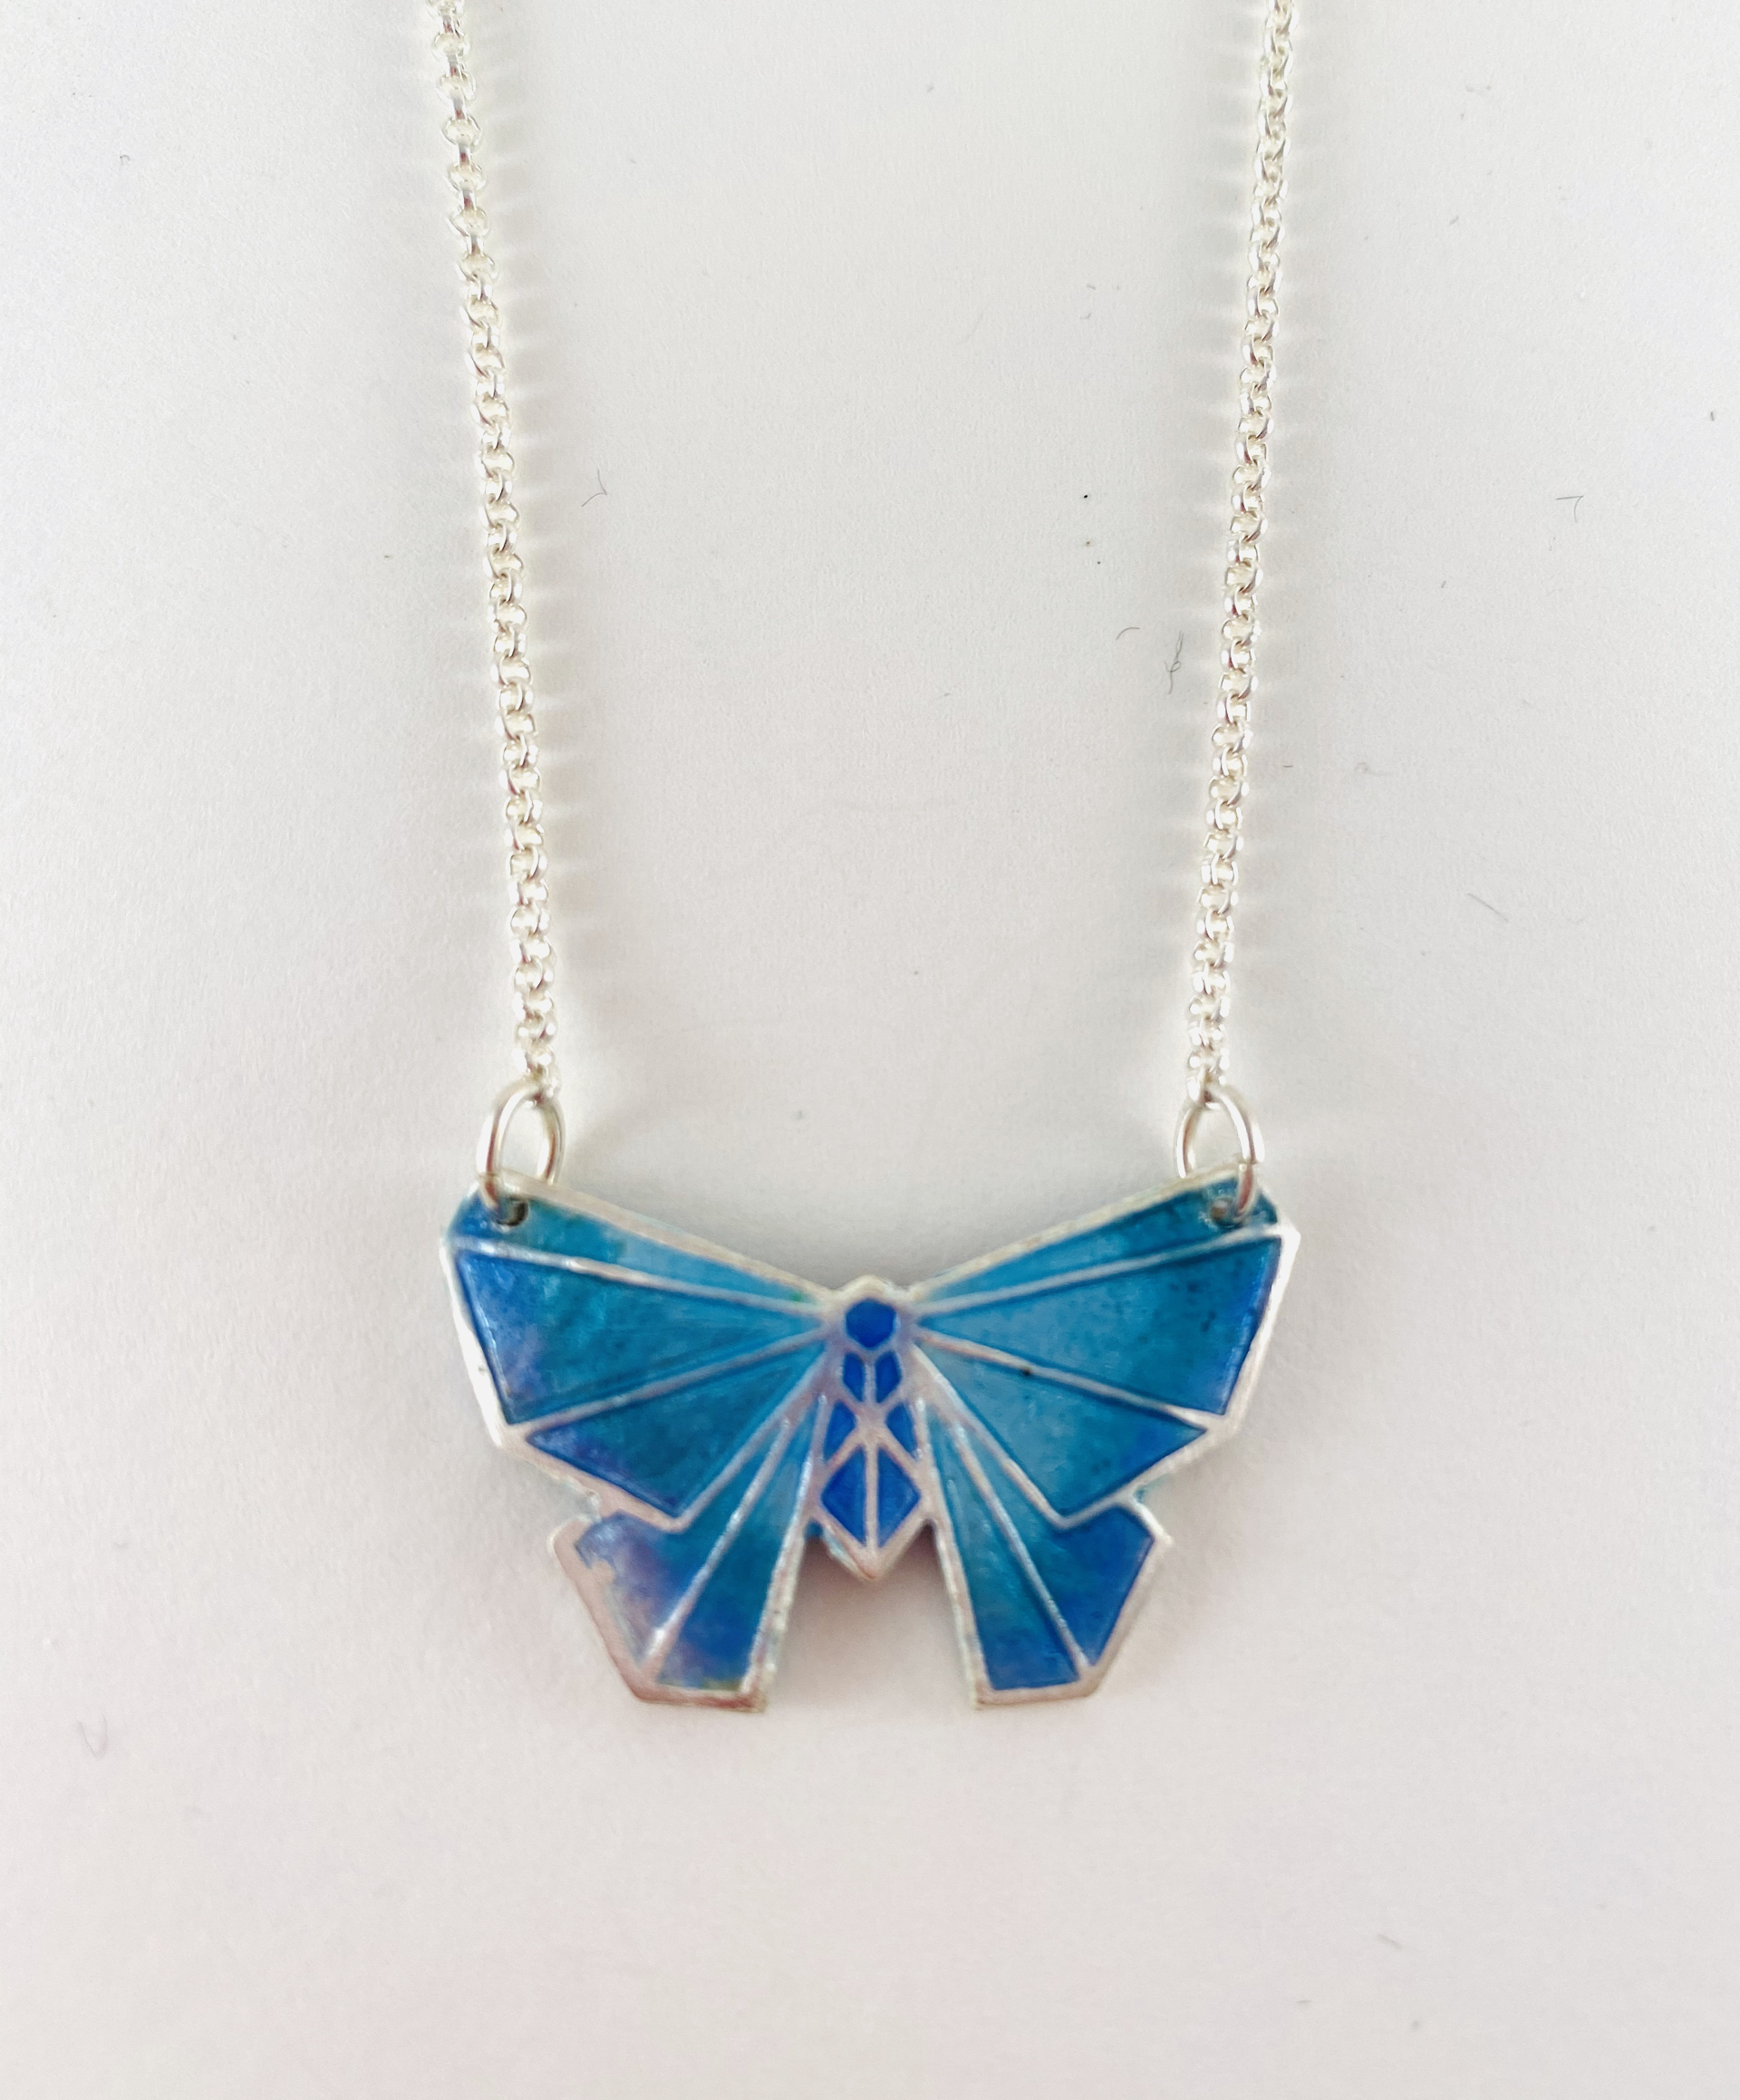 Champleve Butterfly Pendant, 18" Silver Chain Necklace by Karen Hakim